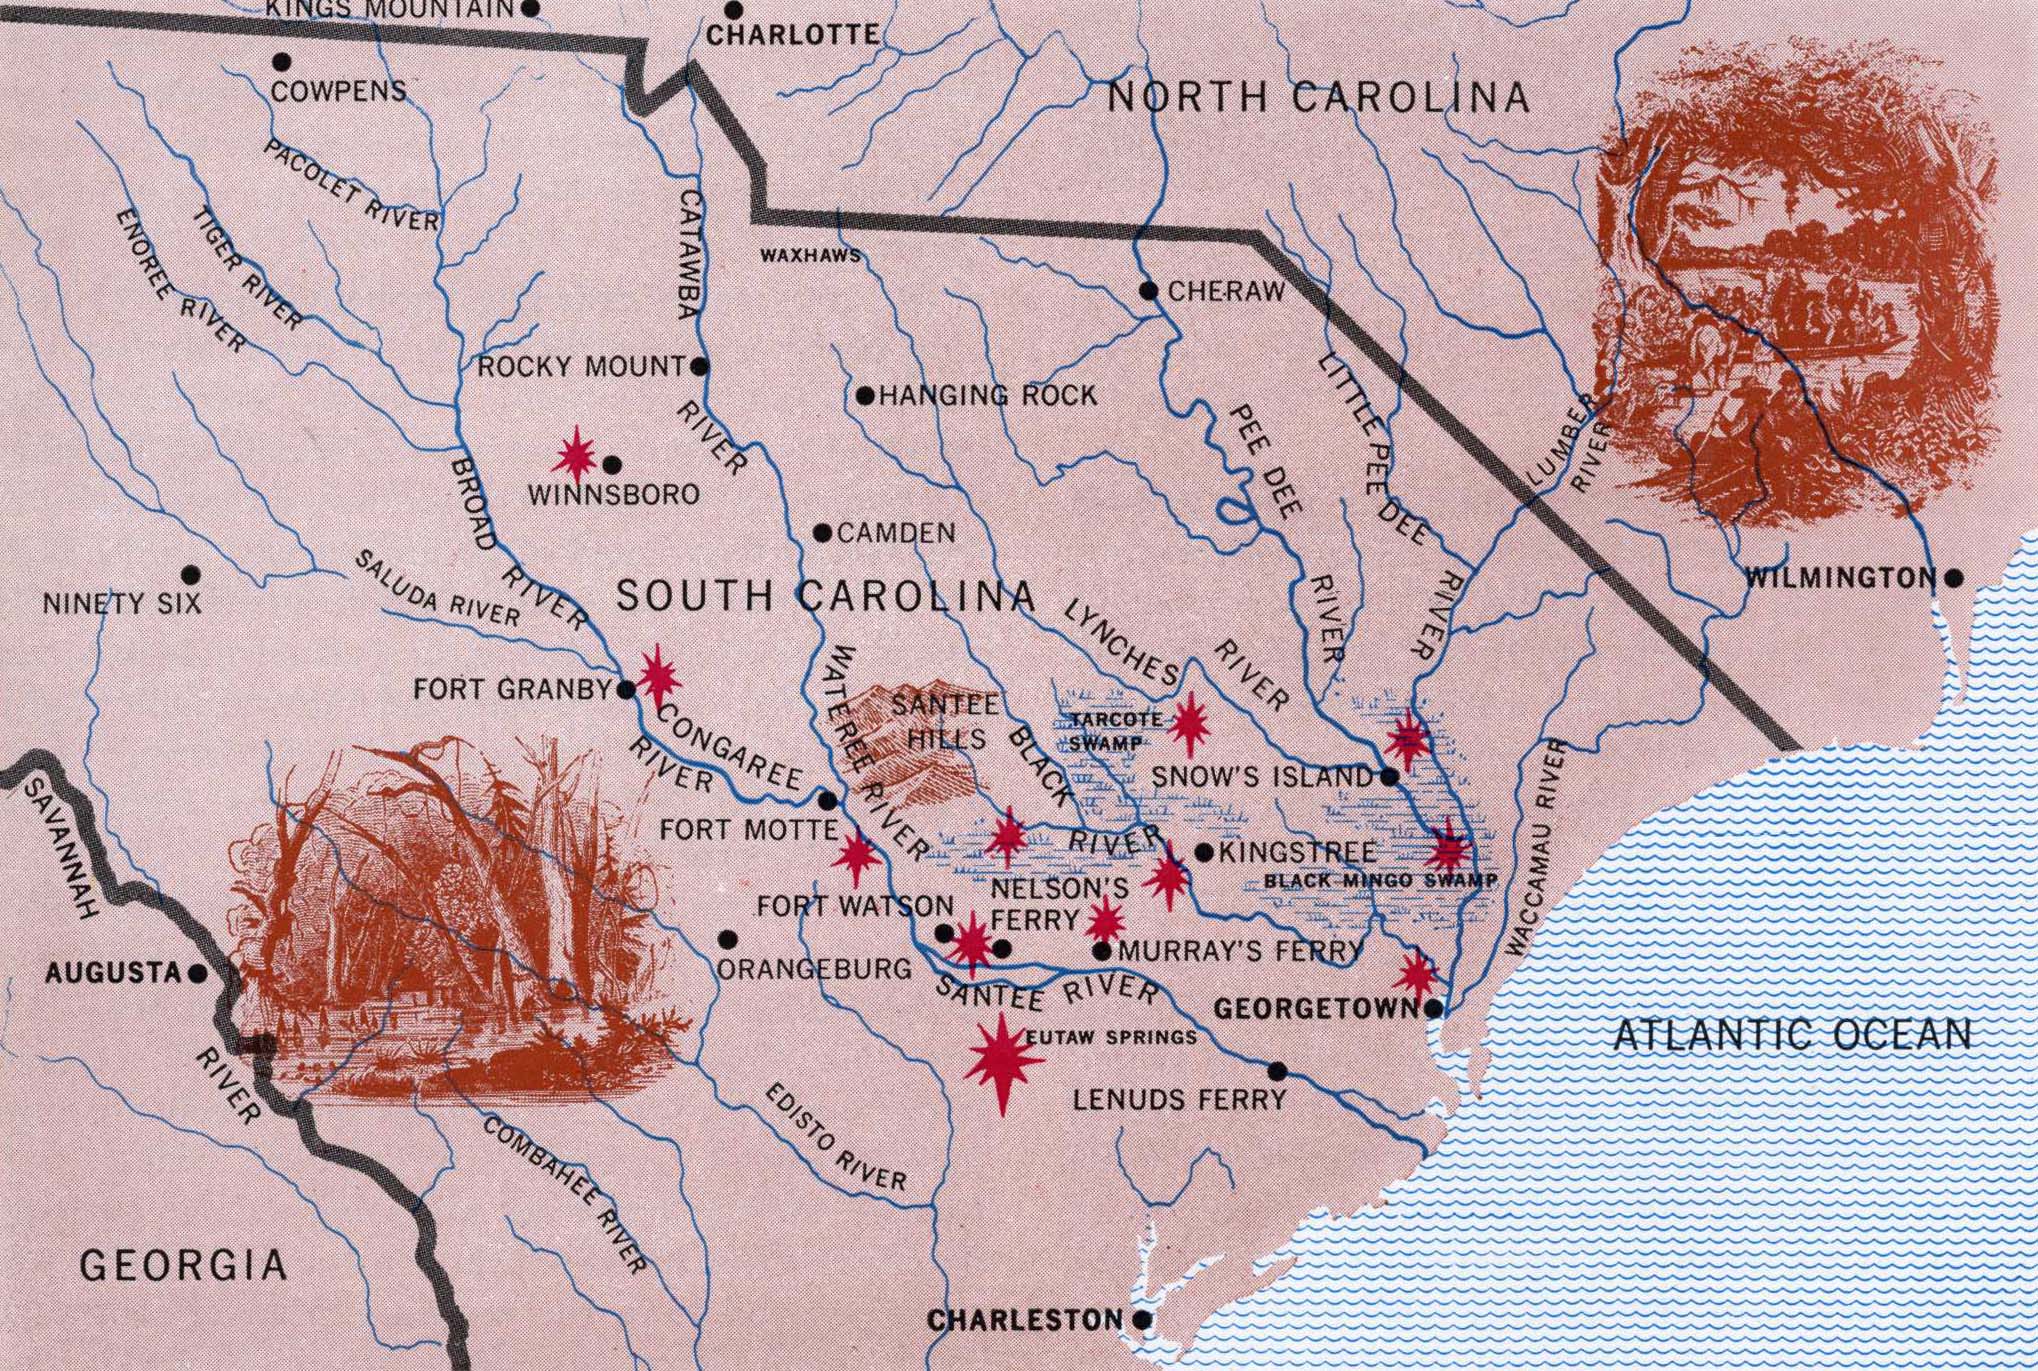 Marion’s operations took place in a low, swampy region drained by many rivers. His major skirmishes are marked in red. May by Richard Hendler